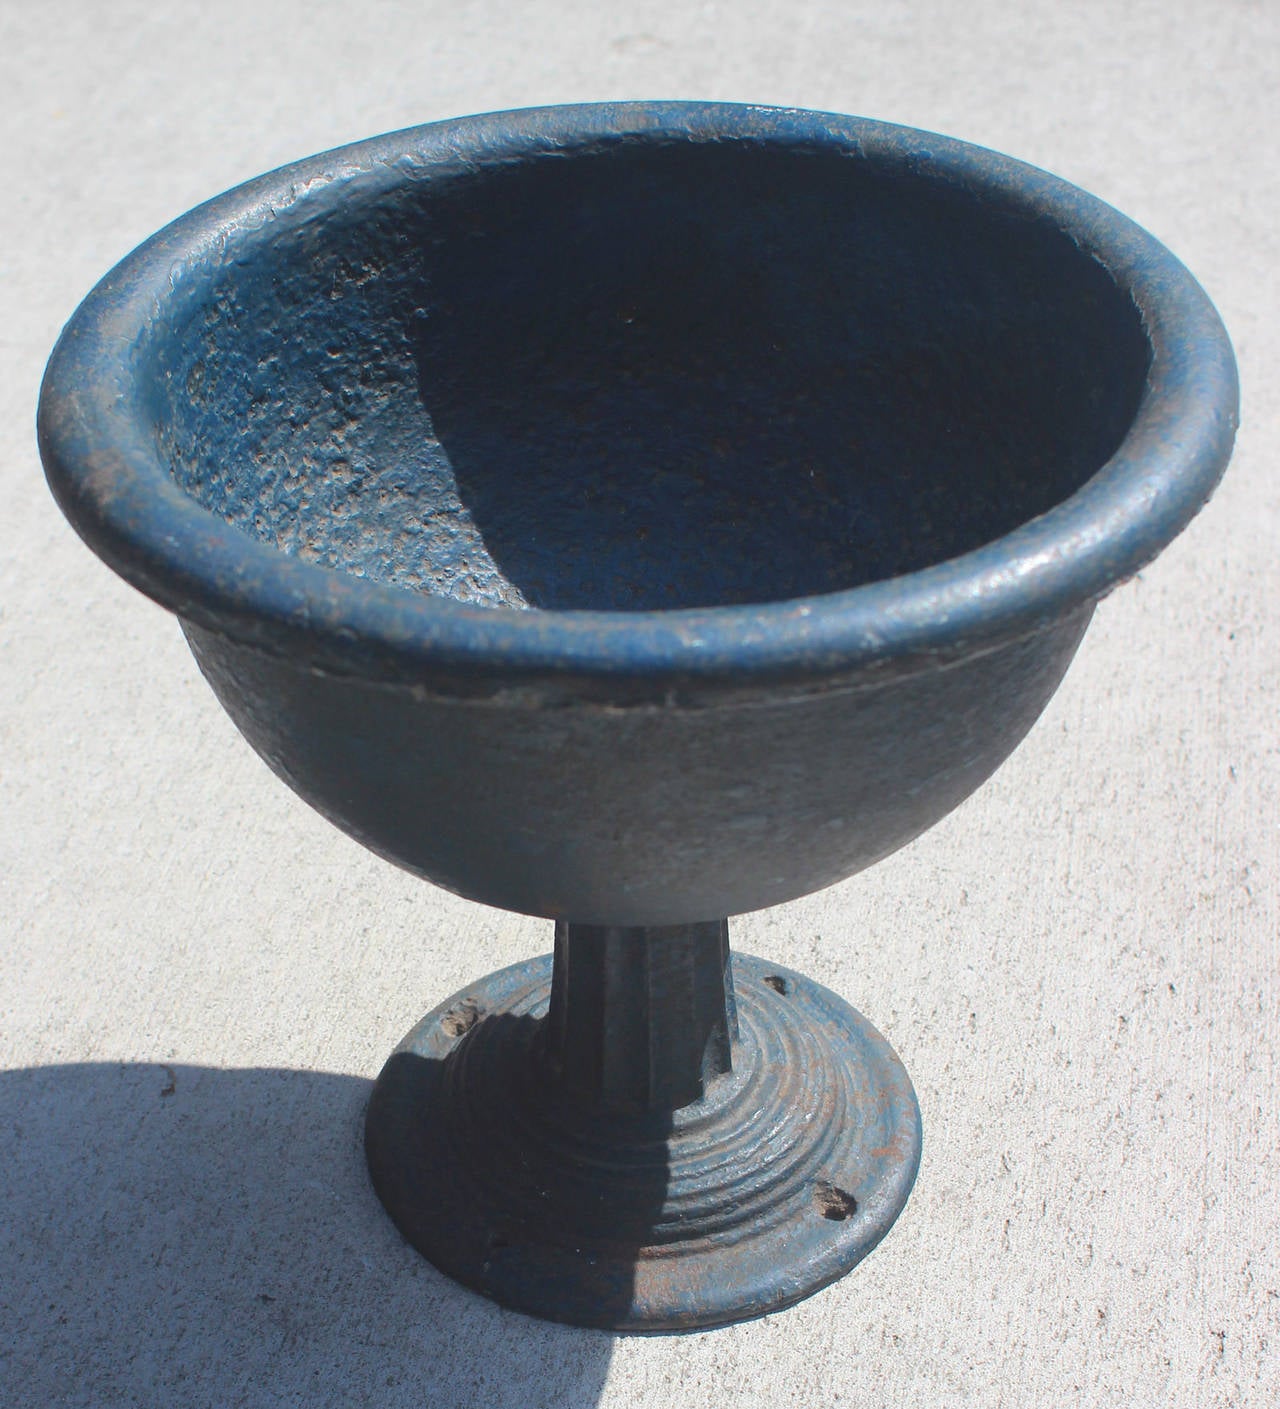 A handsome cast iron compote on a fluted center column and in wonderful, original blue paint. The bowl is beautifully proportioned and has a nice rolled edge; there is a drainage hole so that it can be planted. The base is nicely detailed as well